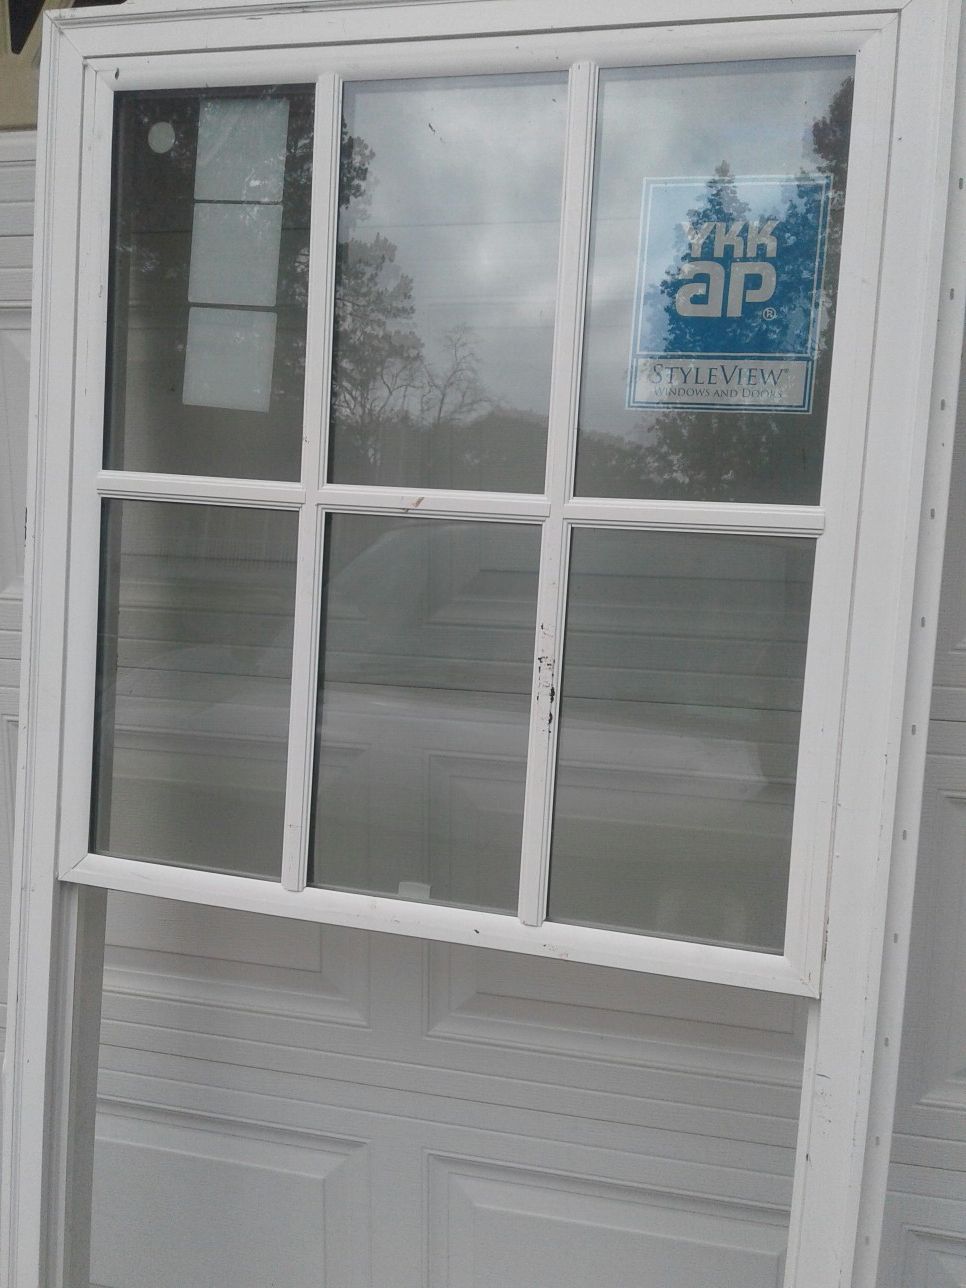 1 Style view windows and doors/ Styleview vinyl single hung Grids $85